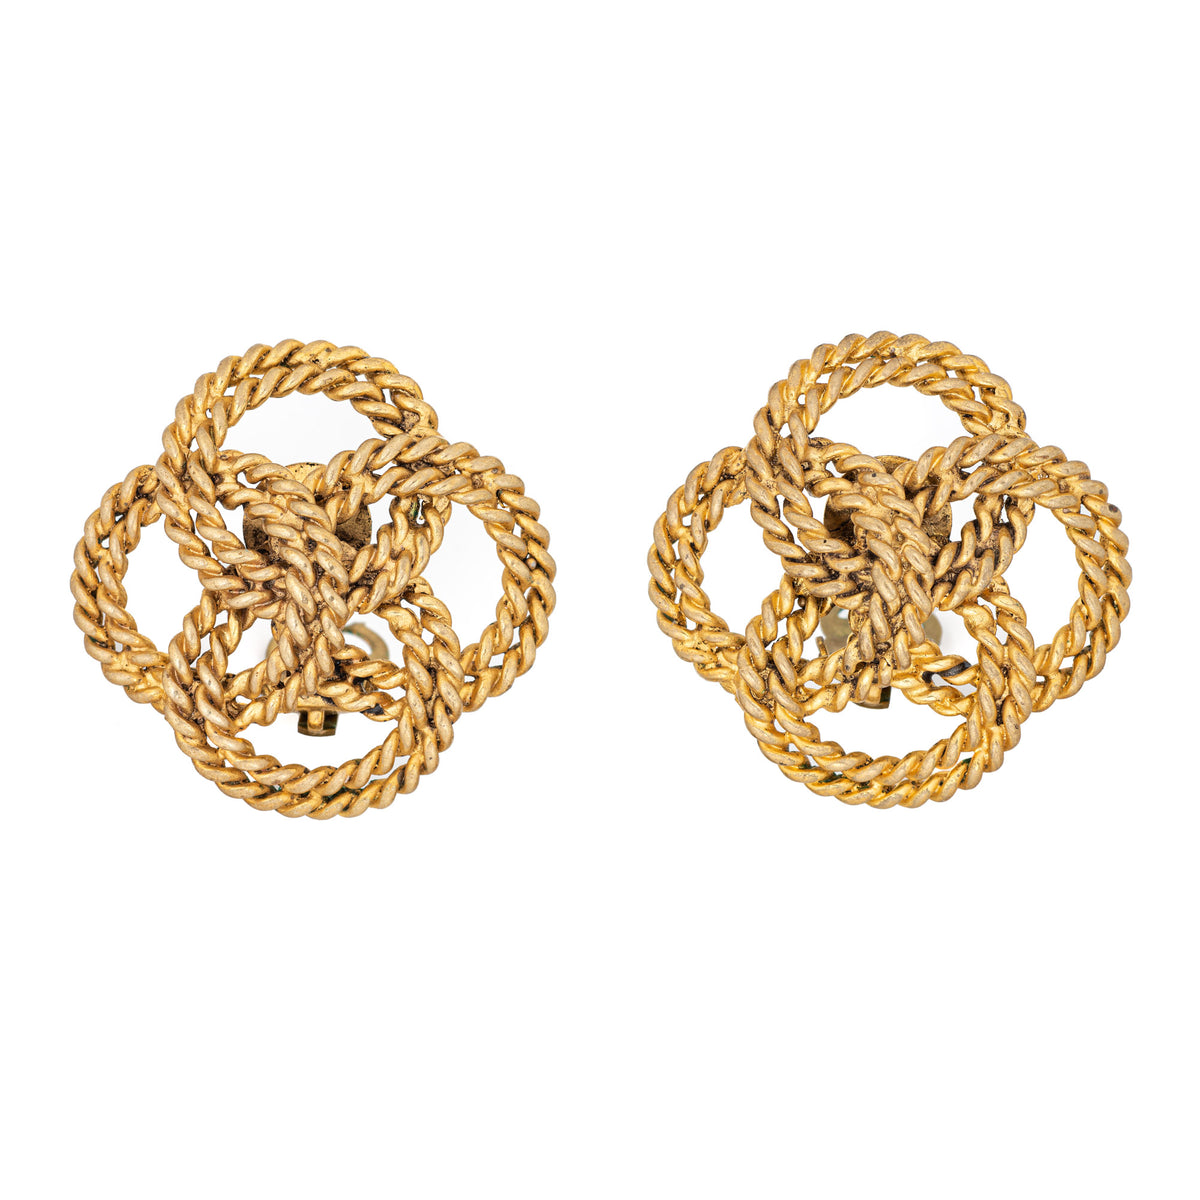 70s Chanel Large Earrings Quatrefoil Round Rope Link Clip On Yellow Gold  Tone